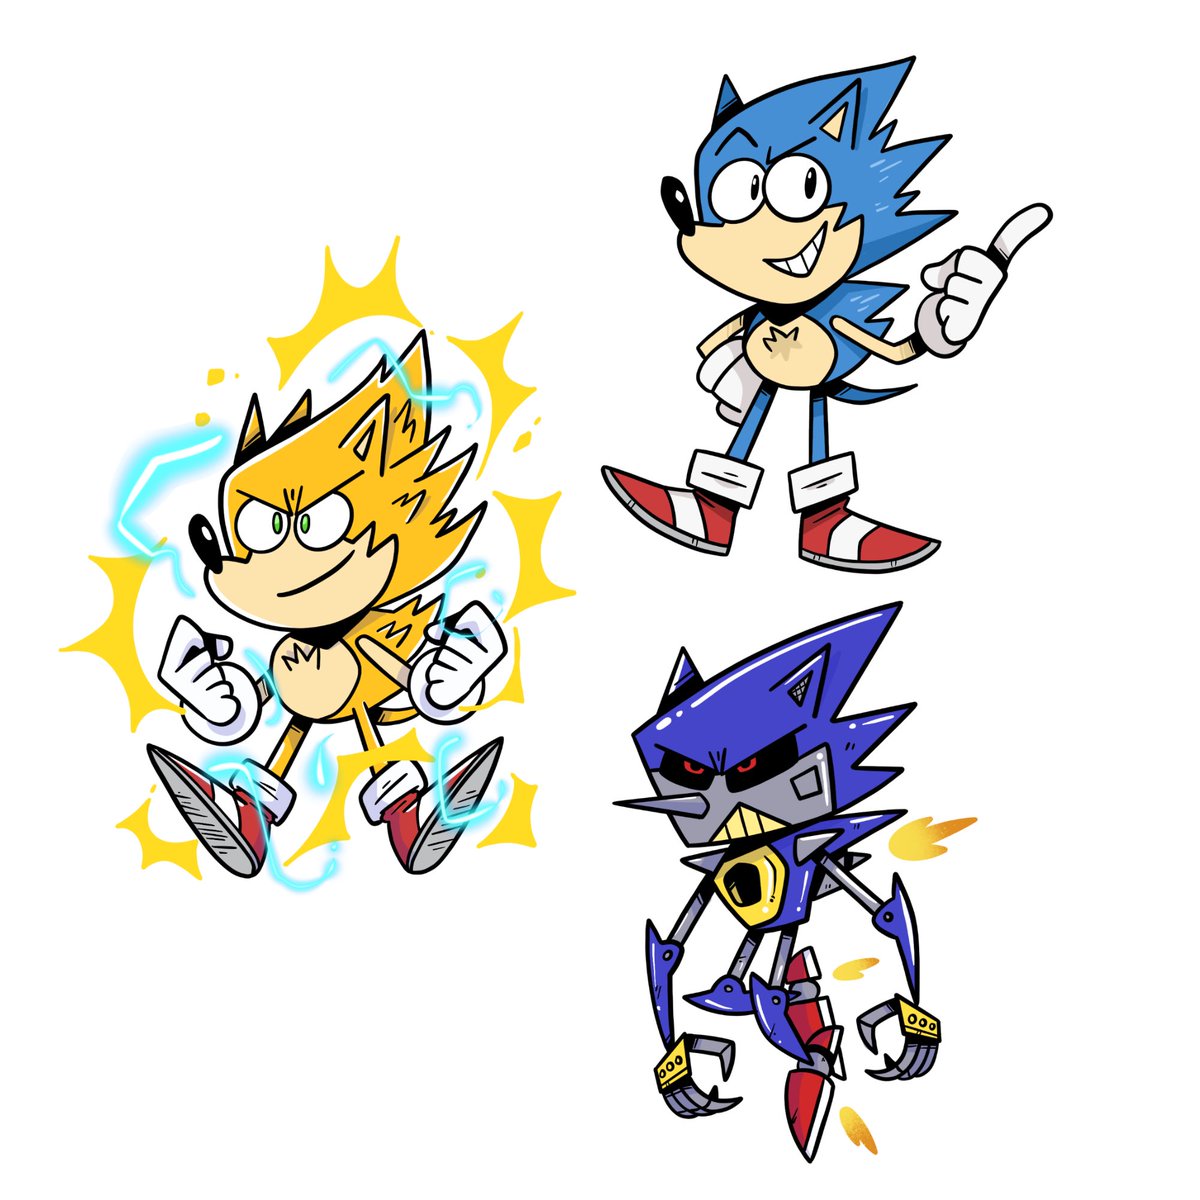 Some Sonic stickers!